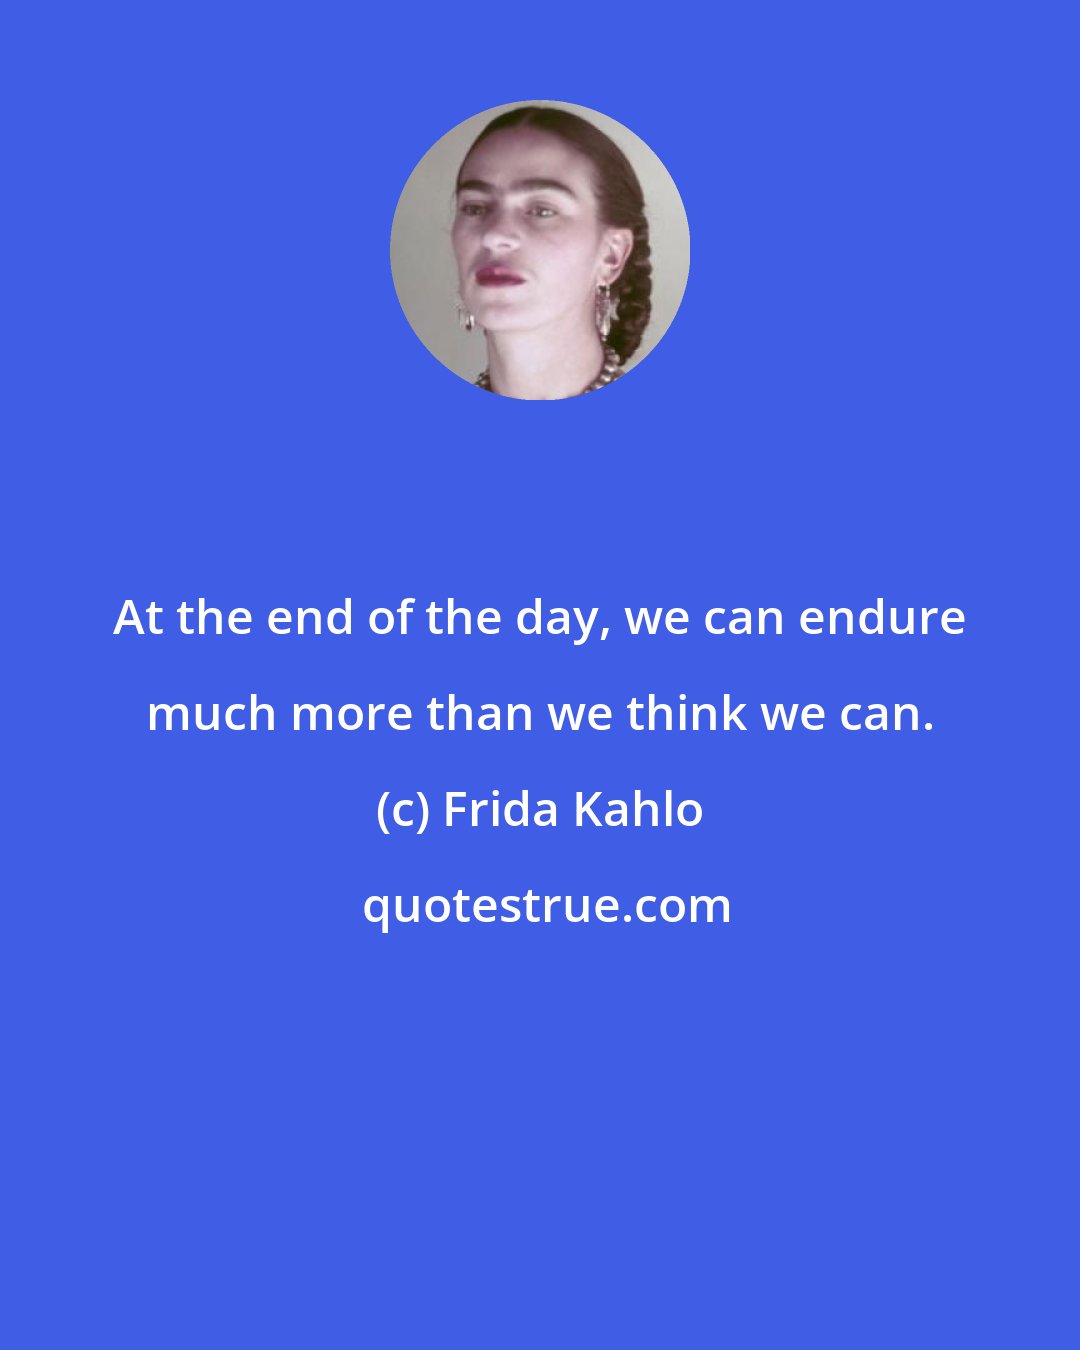 Frida Kahlo: At the end of the day, we can endure much more than we think we can.